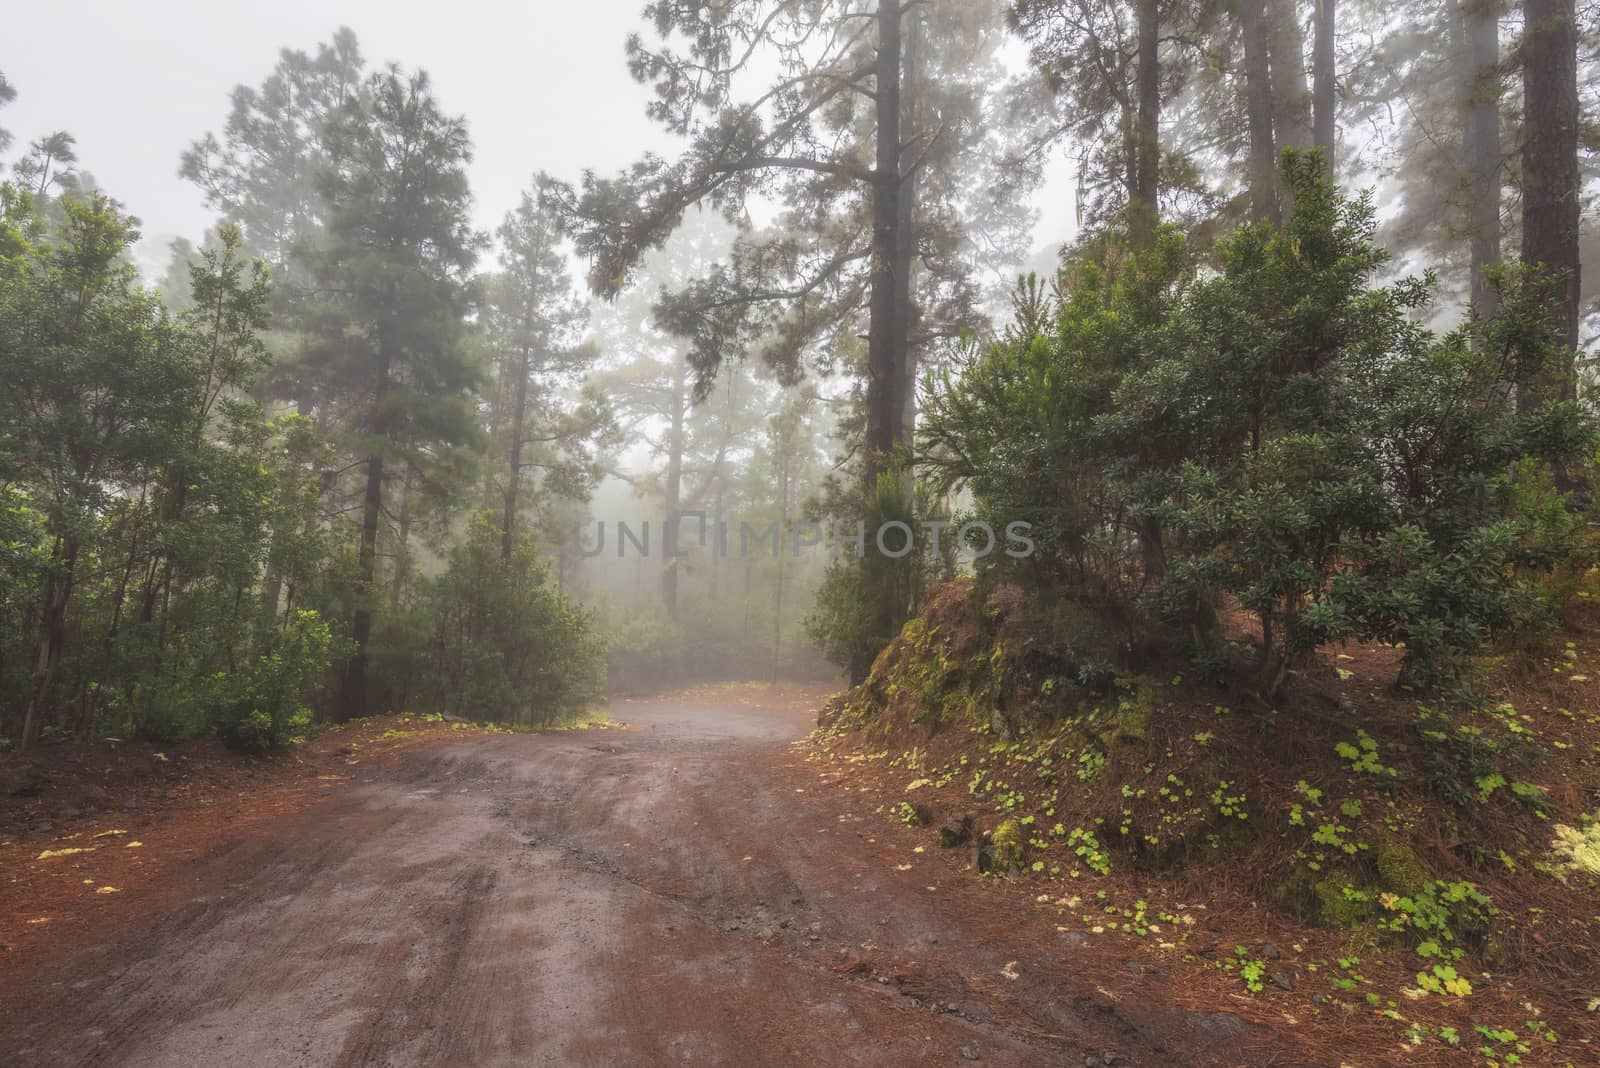 Beautiful foggy forest in Arenas Negras, Tenerife, Canary islands, Spain. by HERRAEZ